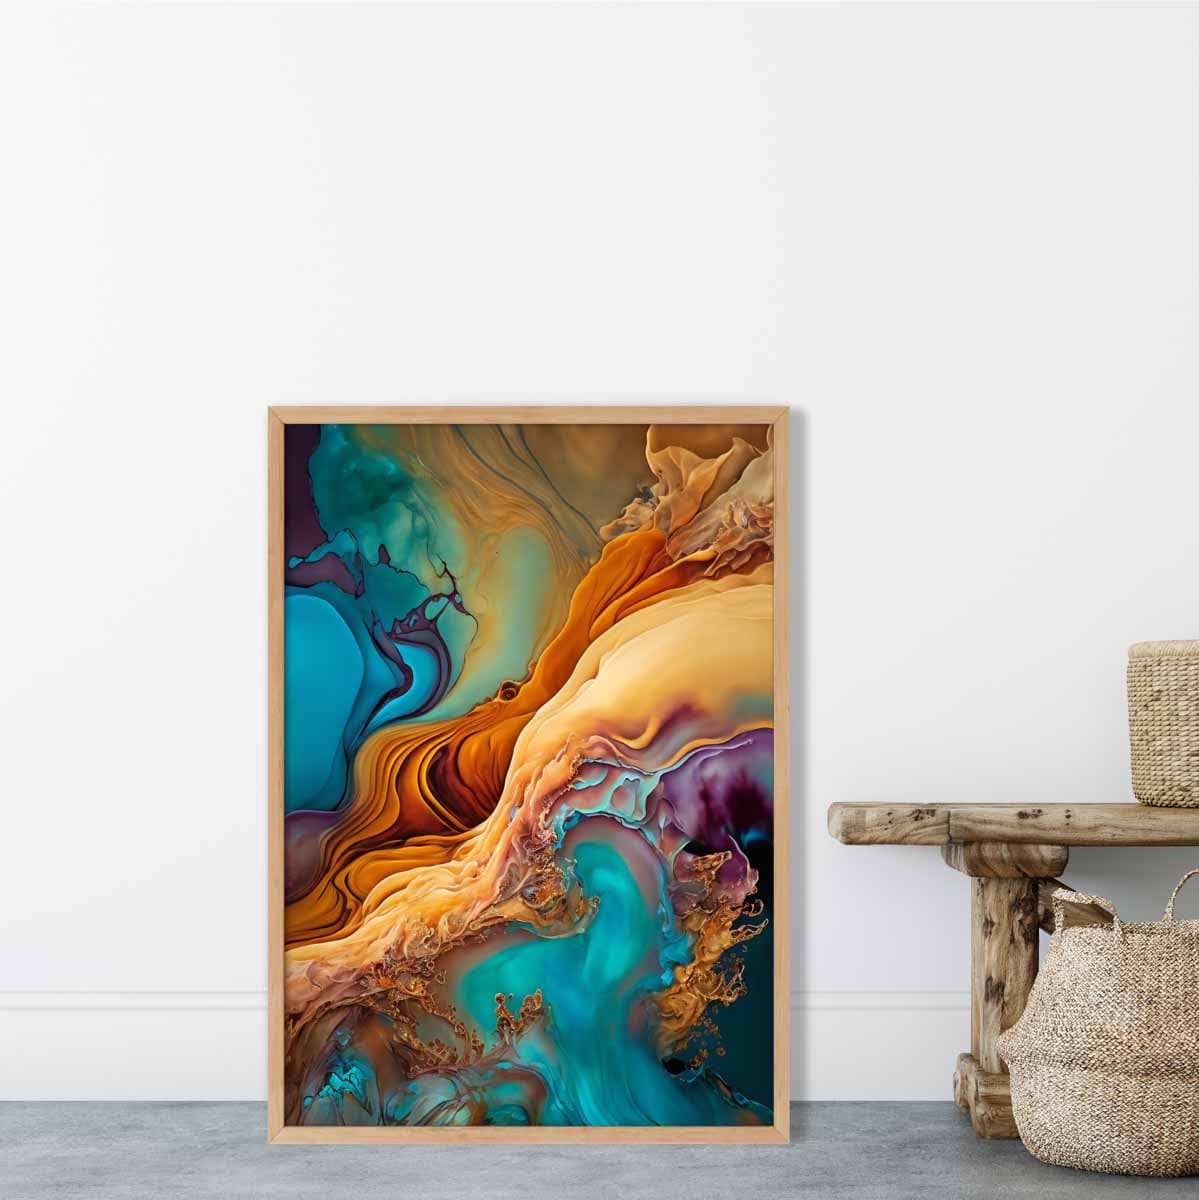 Abstract Fluid Art Prints in Blue and Orange No 1